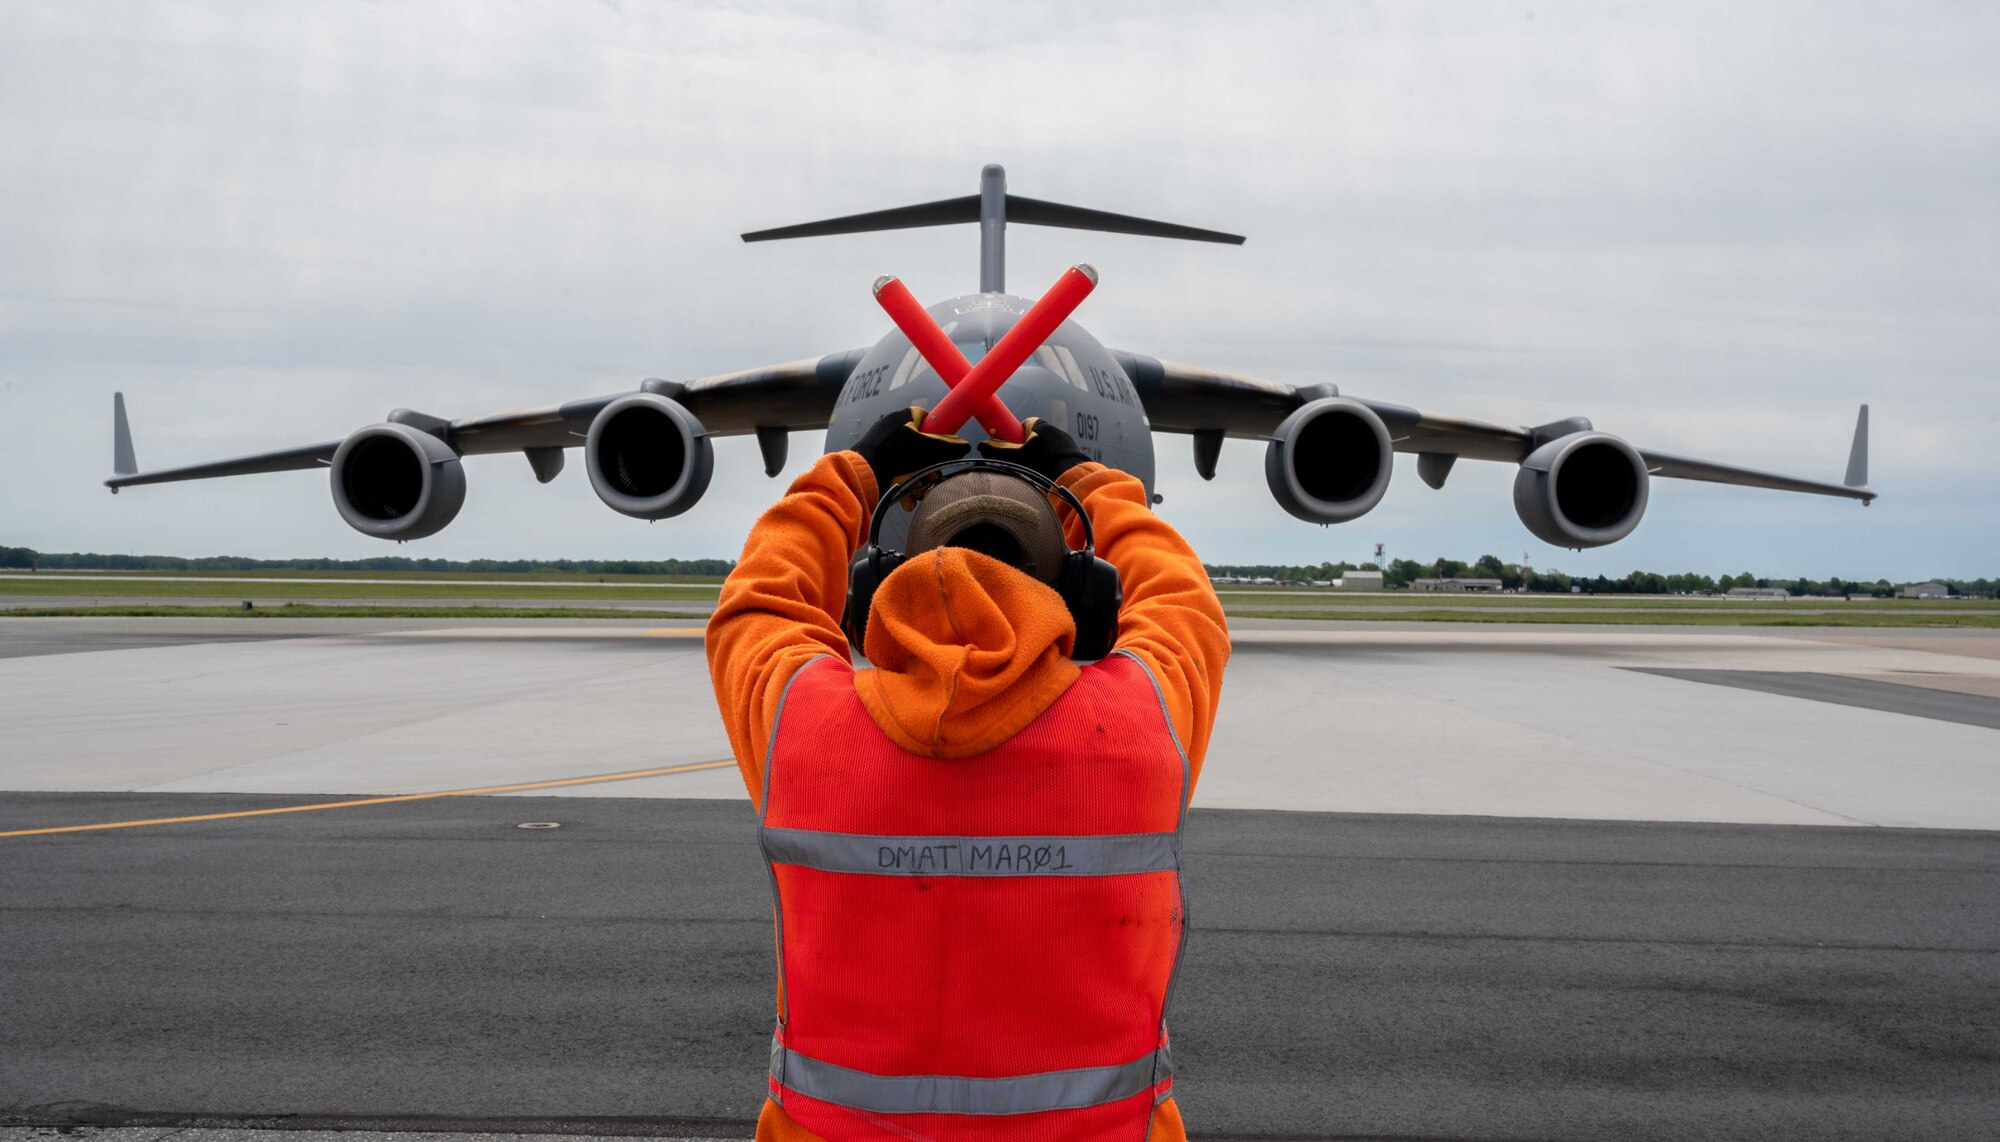 A member of the 436th Aircraft Maintenance Squadron transient alert marshals a North Carolina Air National Guard C-17 Globemaster III at Dover Air Force Base, Delaware, May 13, 2021. The C-17 carries a maximum of 170,900, allowing it to provide rapid airlift across the globe. (U.S. Air Force photo by Airman 1st Class Faith Schaefer)